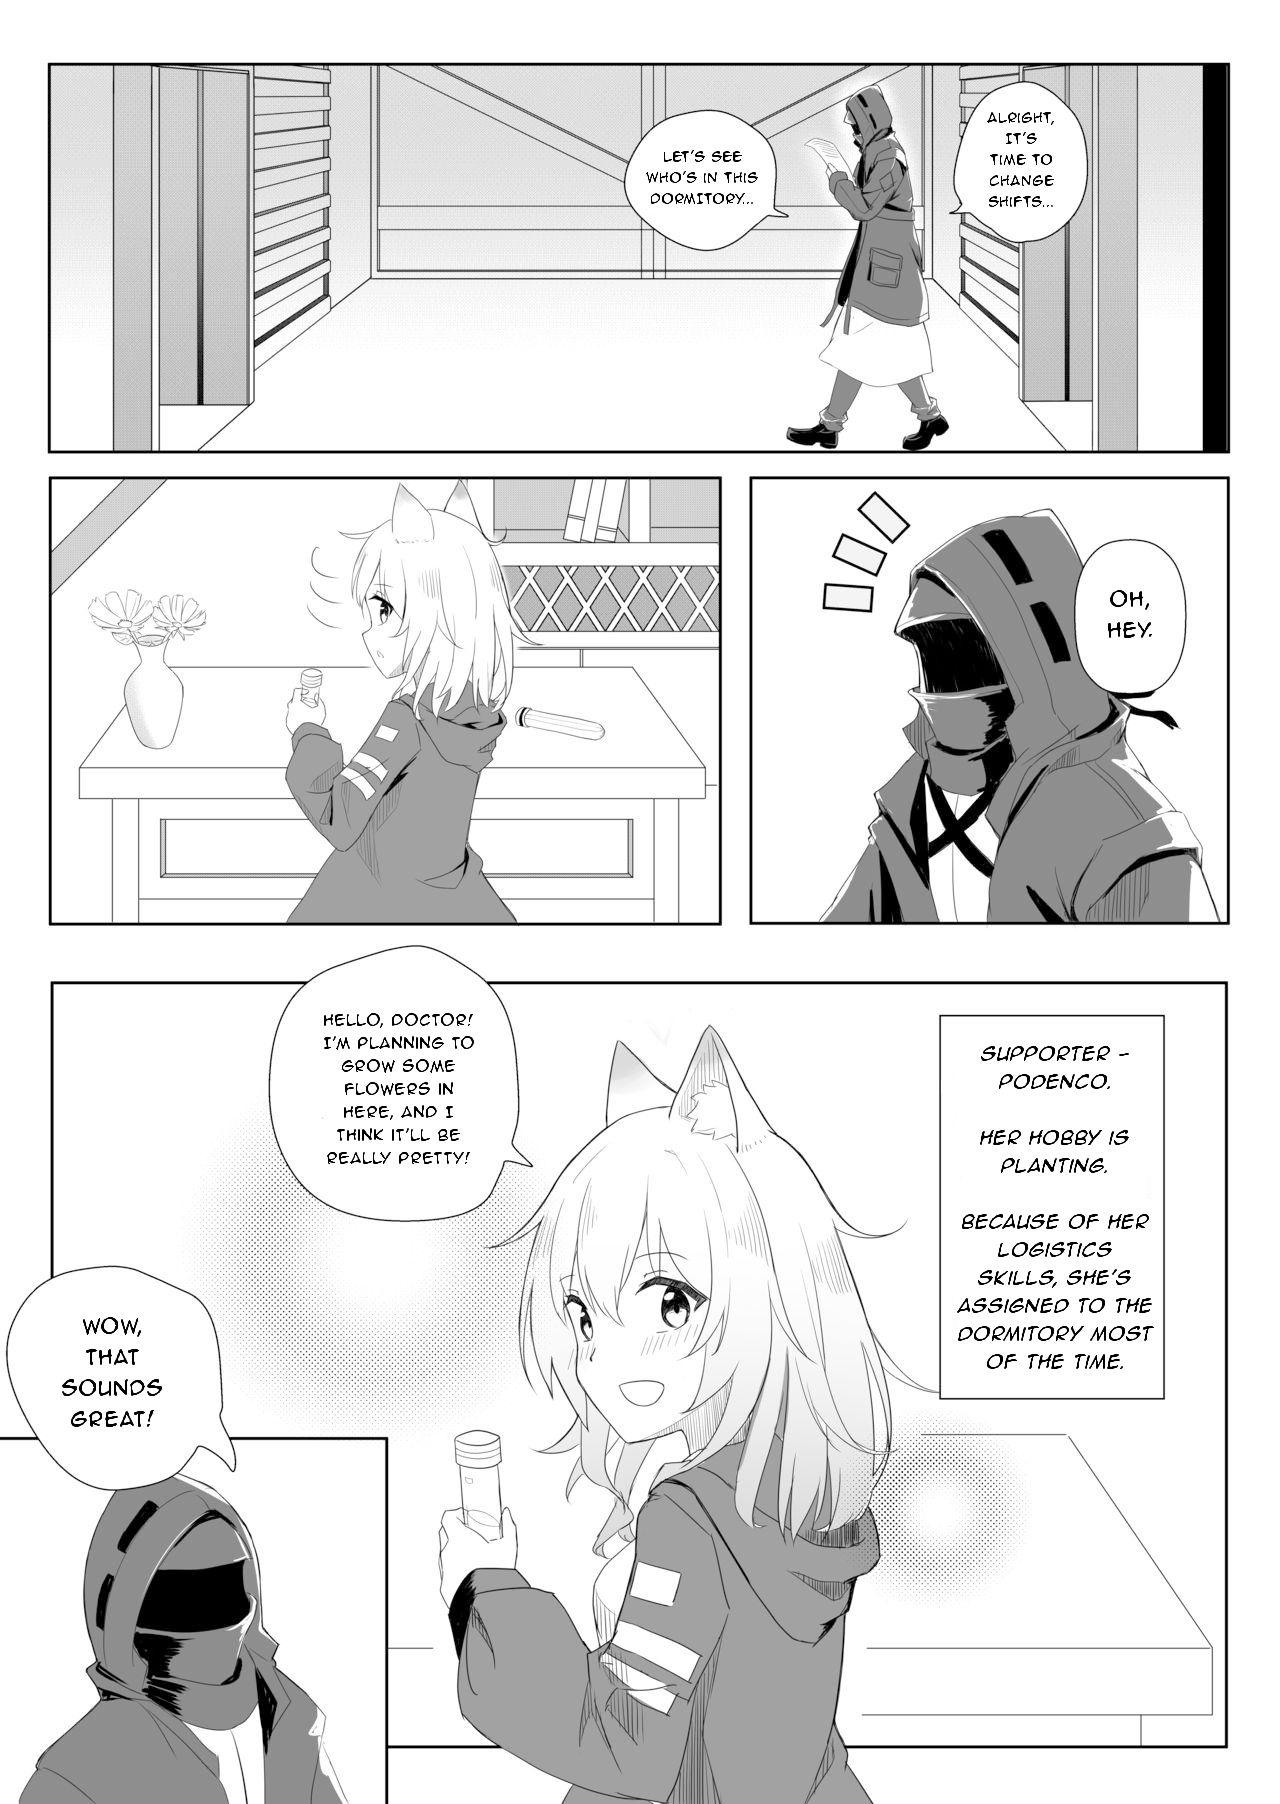 Point Of View Podenco in heat - Arknights Funny - Page 2